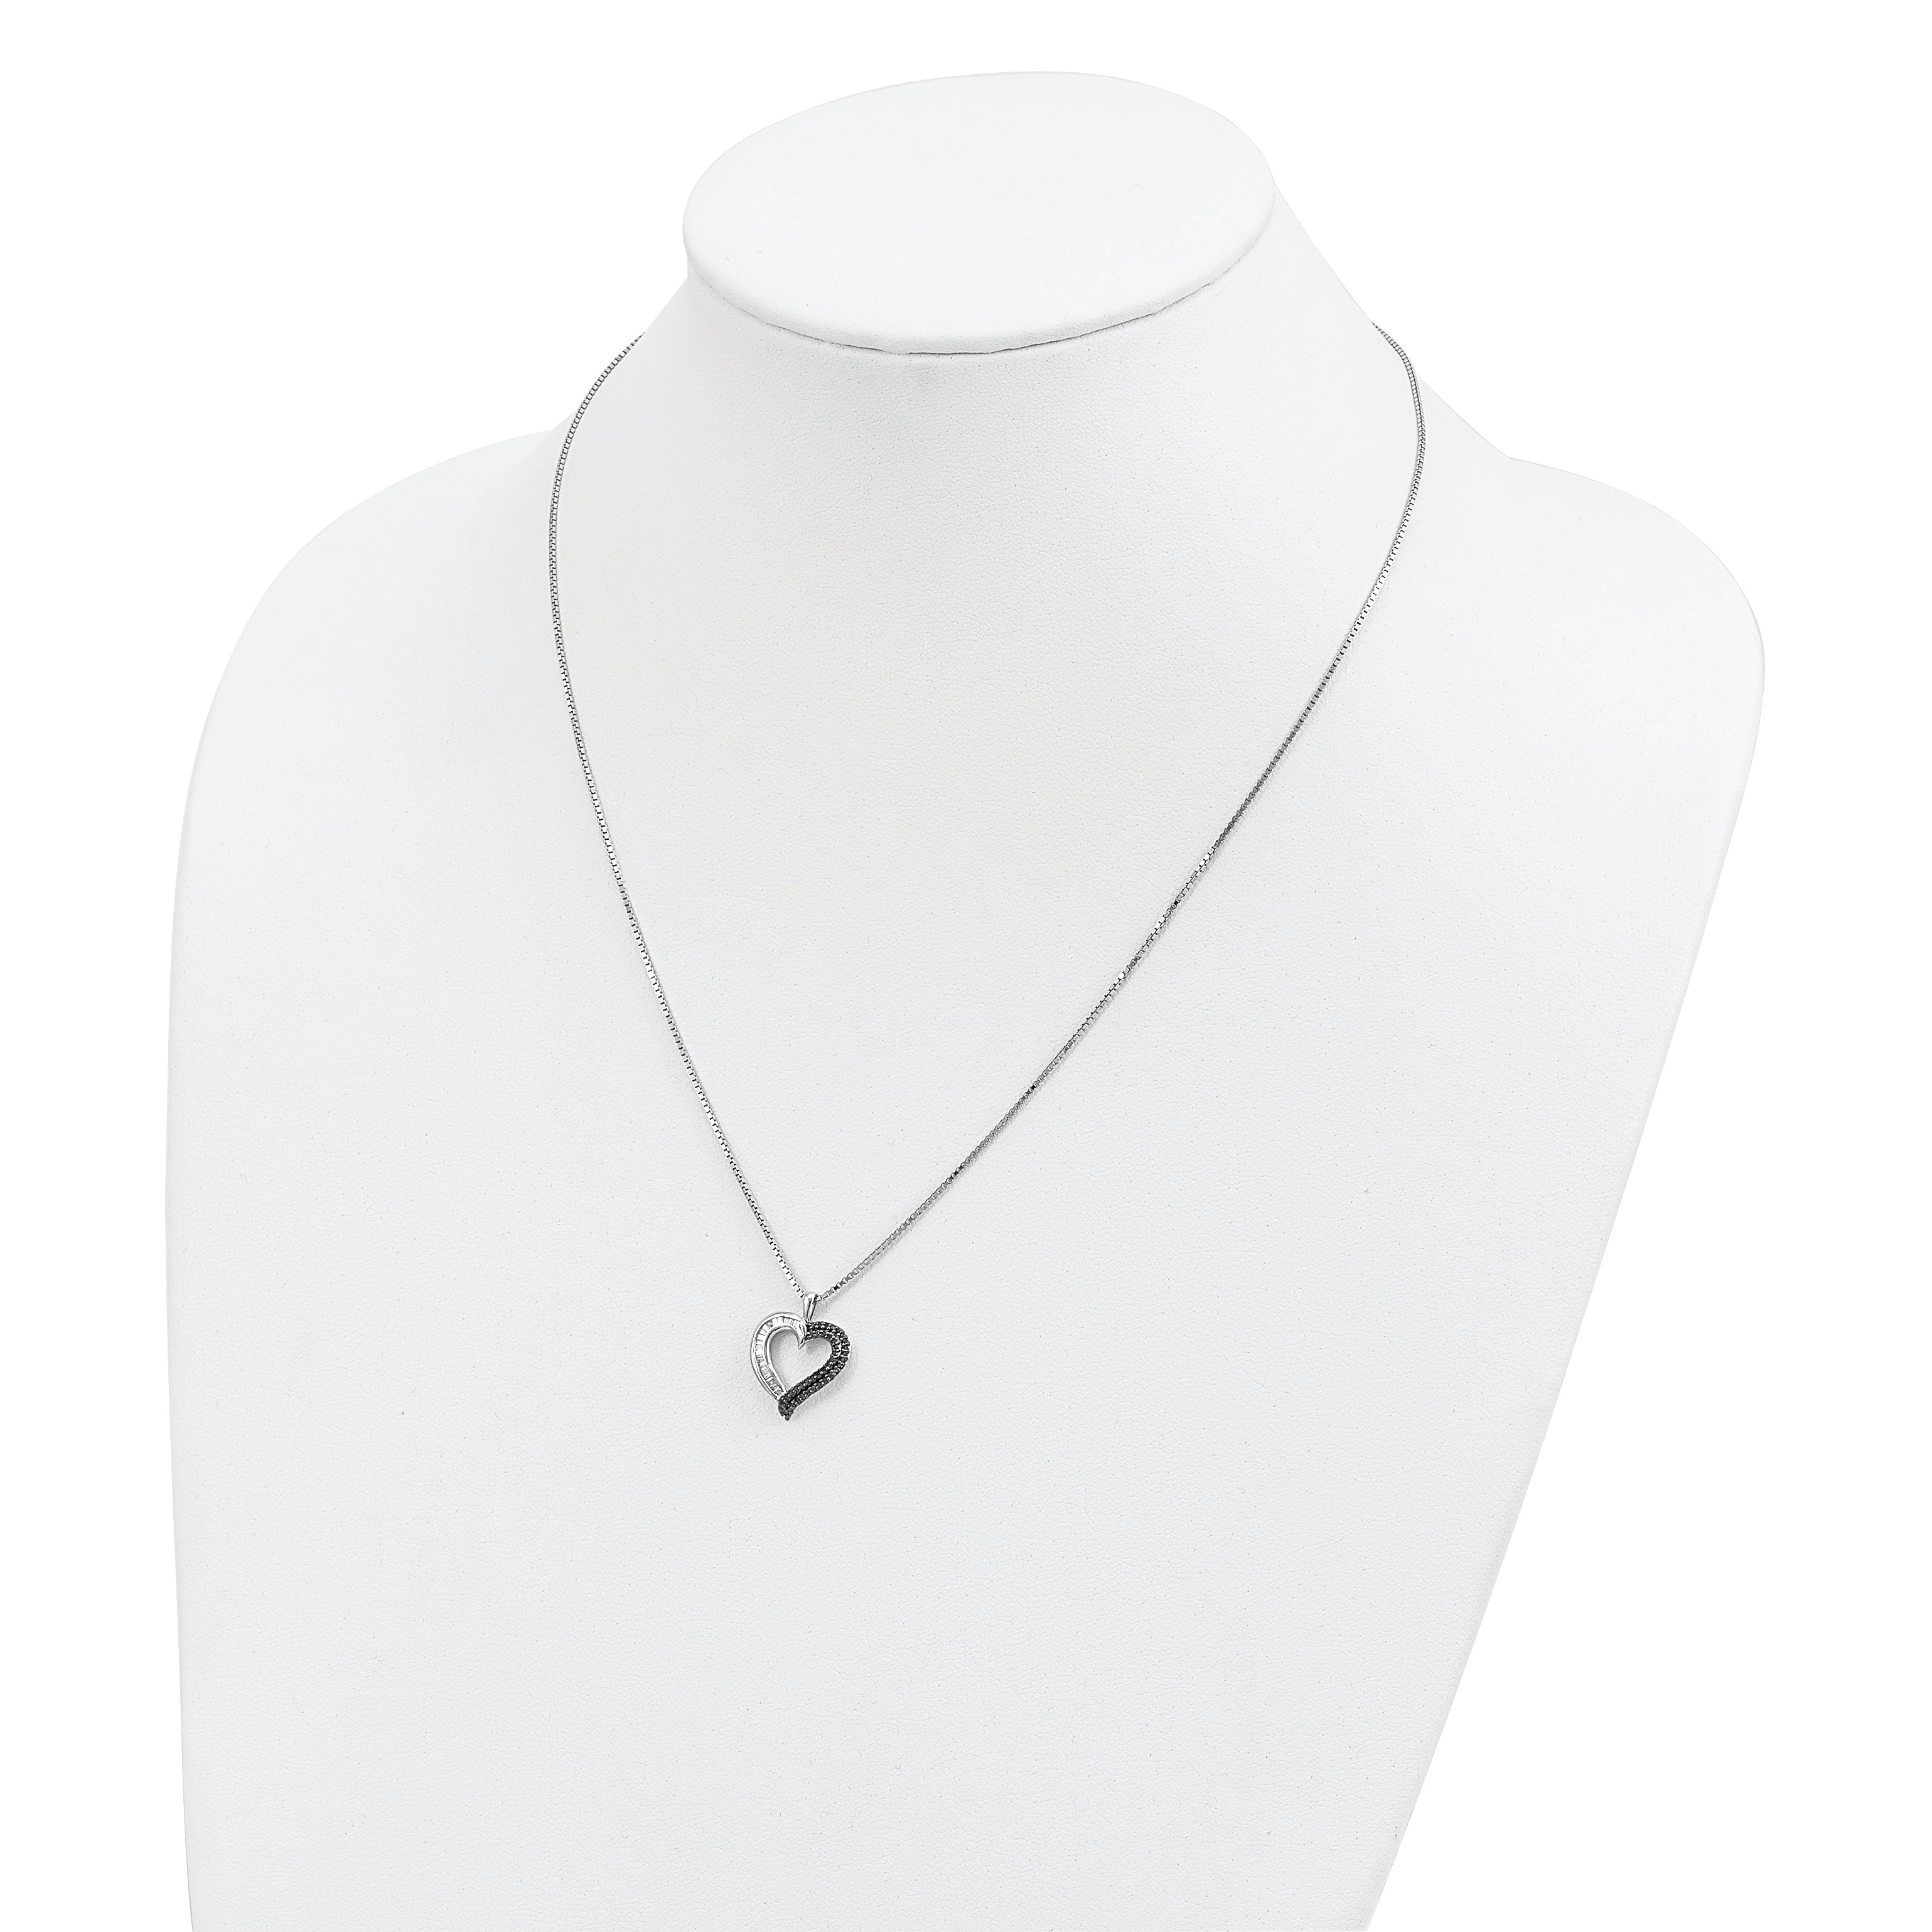 White Night Sterling Silver Rhodium-plated Black and White Diamond Heart 18 Inch Necklace with 2 Inch Extender